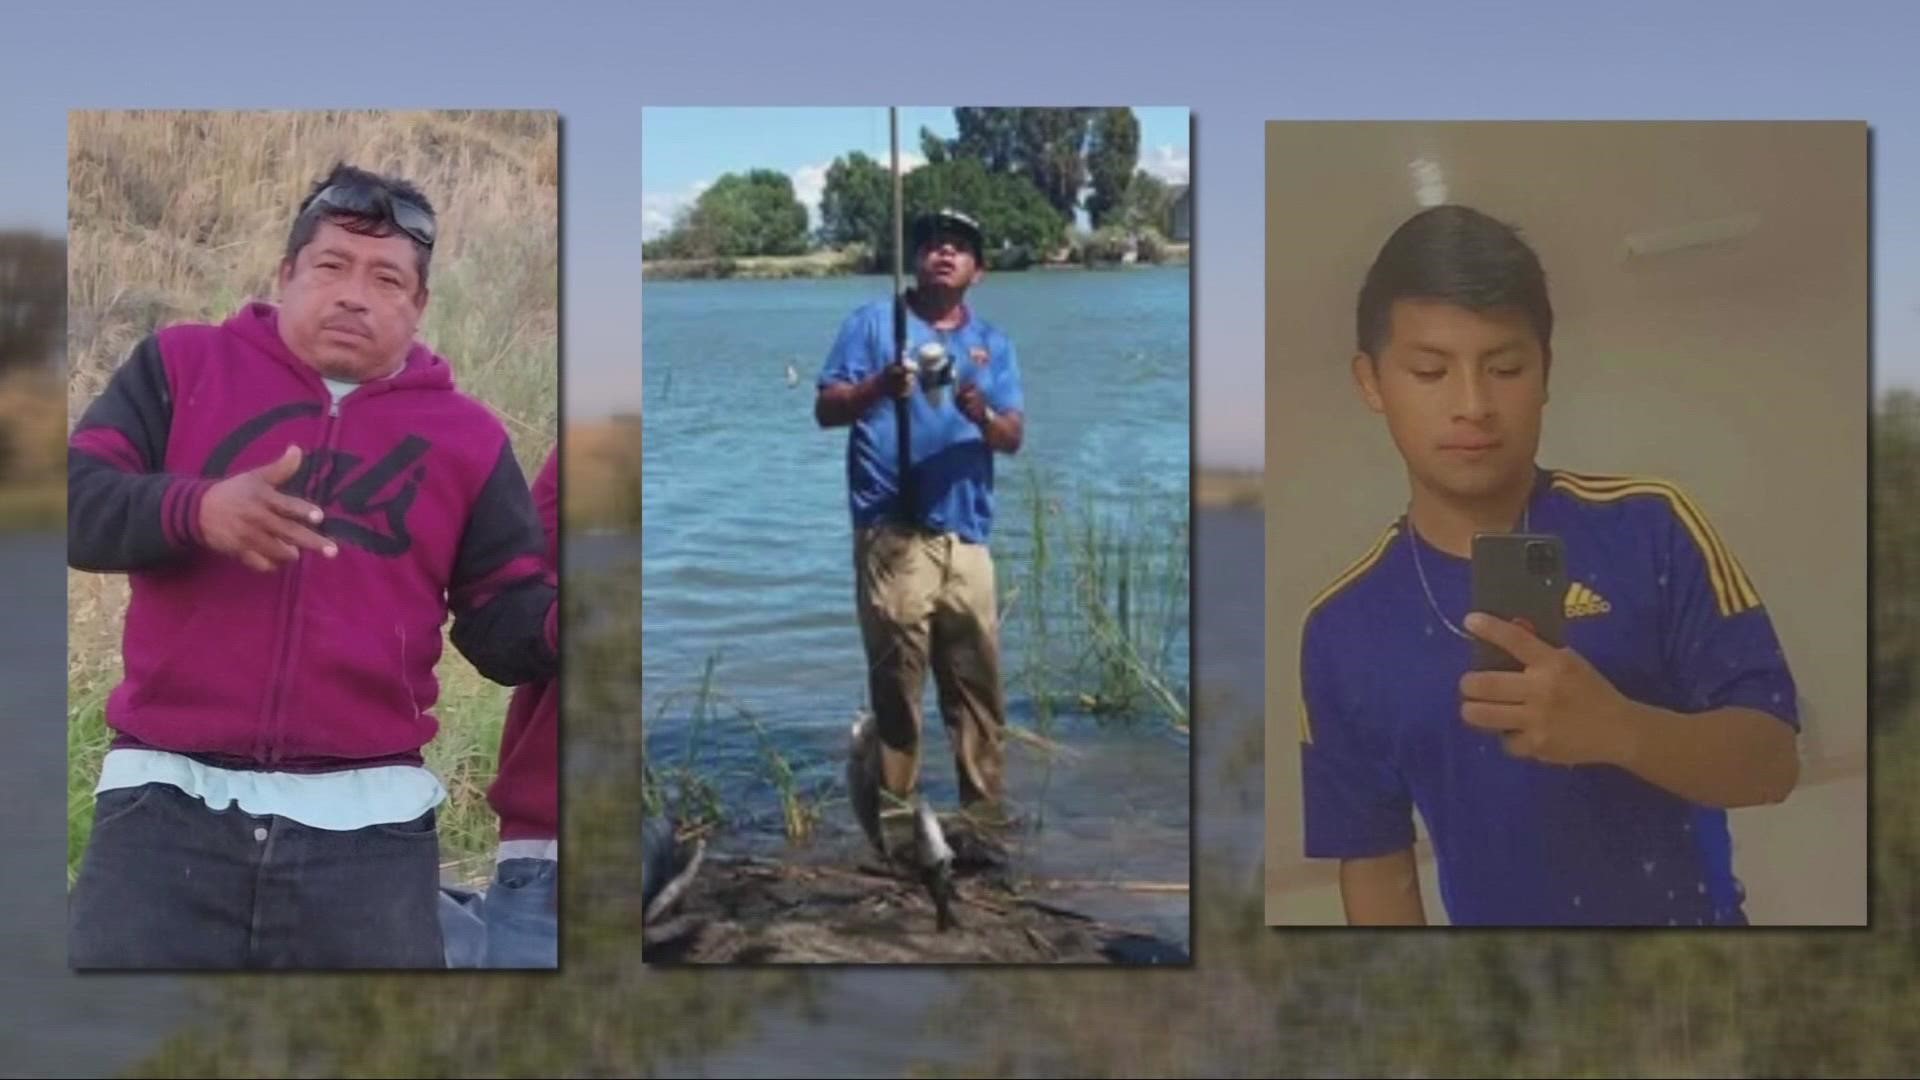 When an 8-year-old child got swept in the current near Brannan Island in Sacramento County, three men died trying, one-by-one, to save the kid.